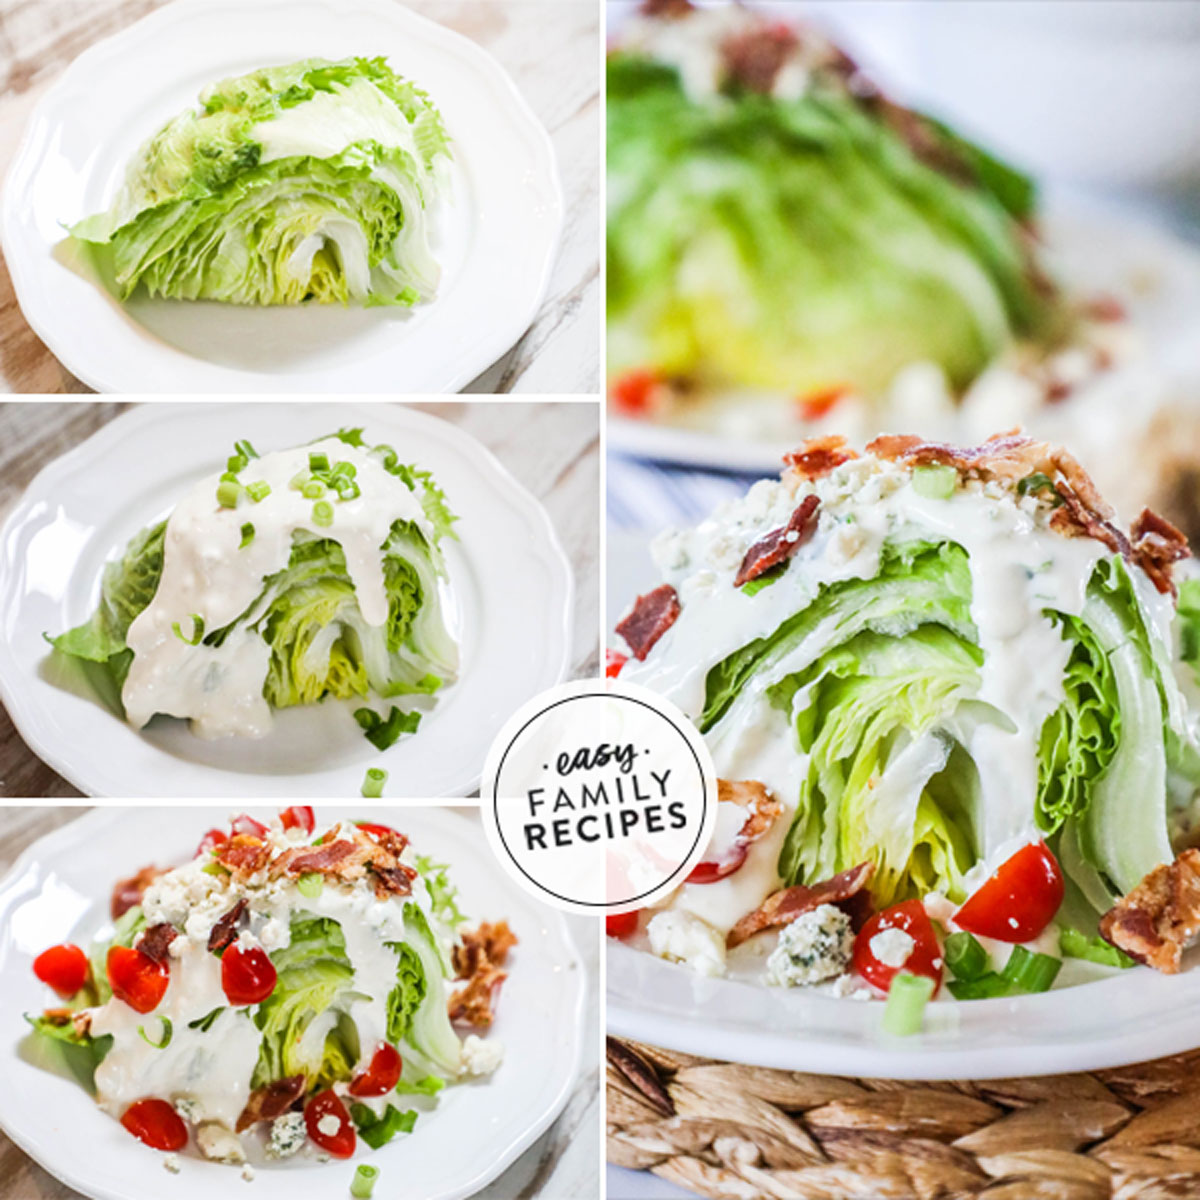 Classic Steakhouse Wedge Salad